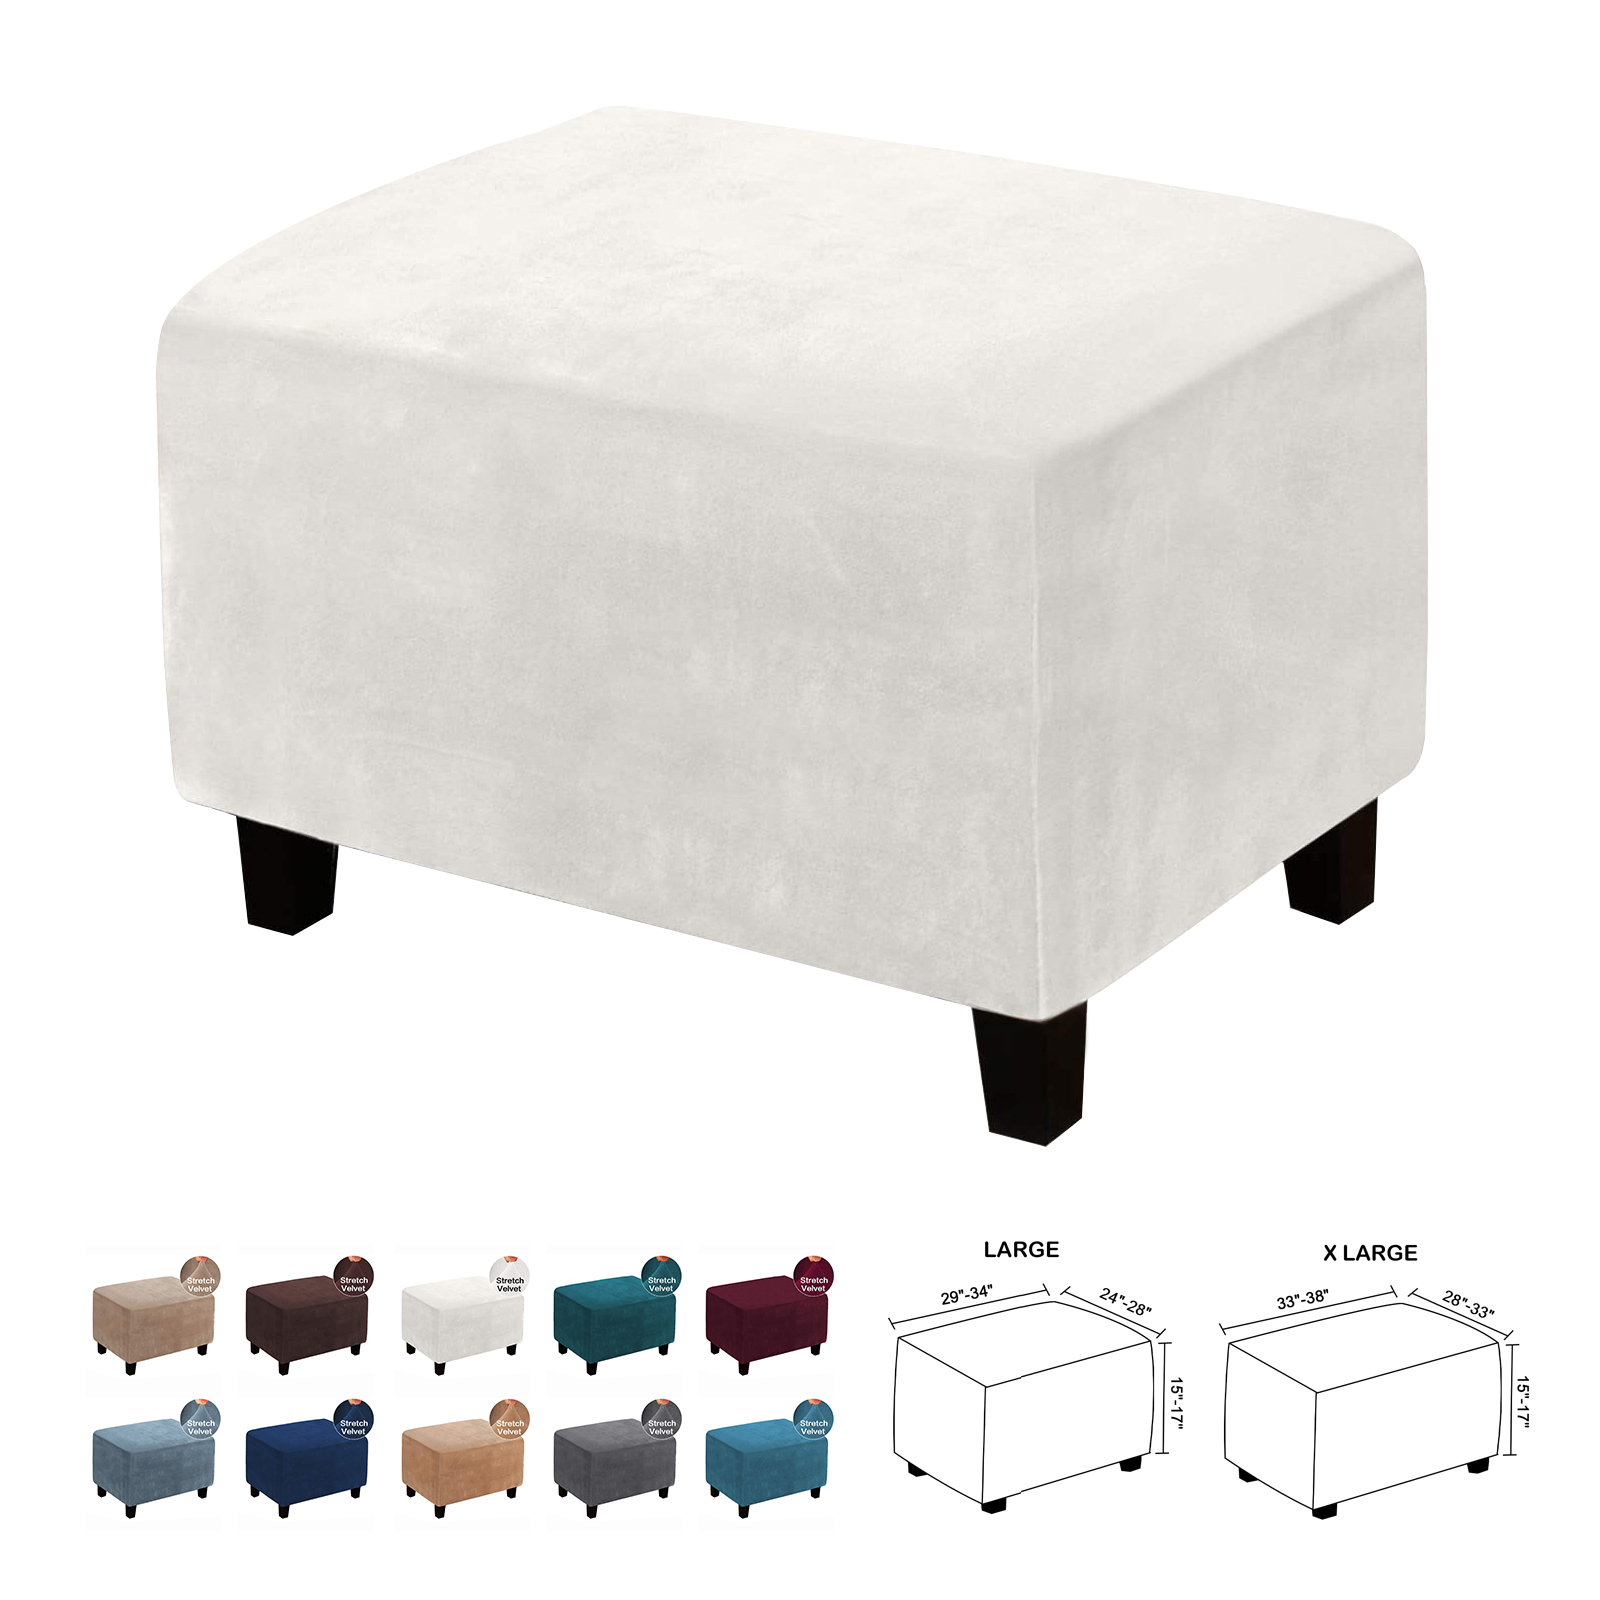 CJC Velvet Ottoman Cover, Stretch Storage Ottoman Slipcover, Rectangle Footstool Furniture Protector, L/XL, 10 Colors - image 1 of 9